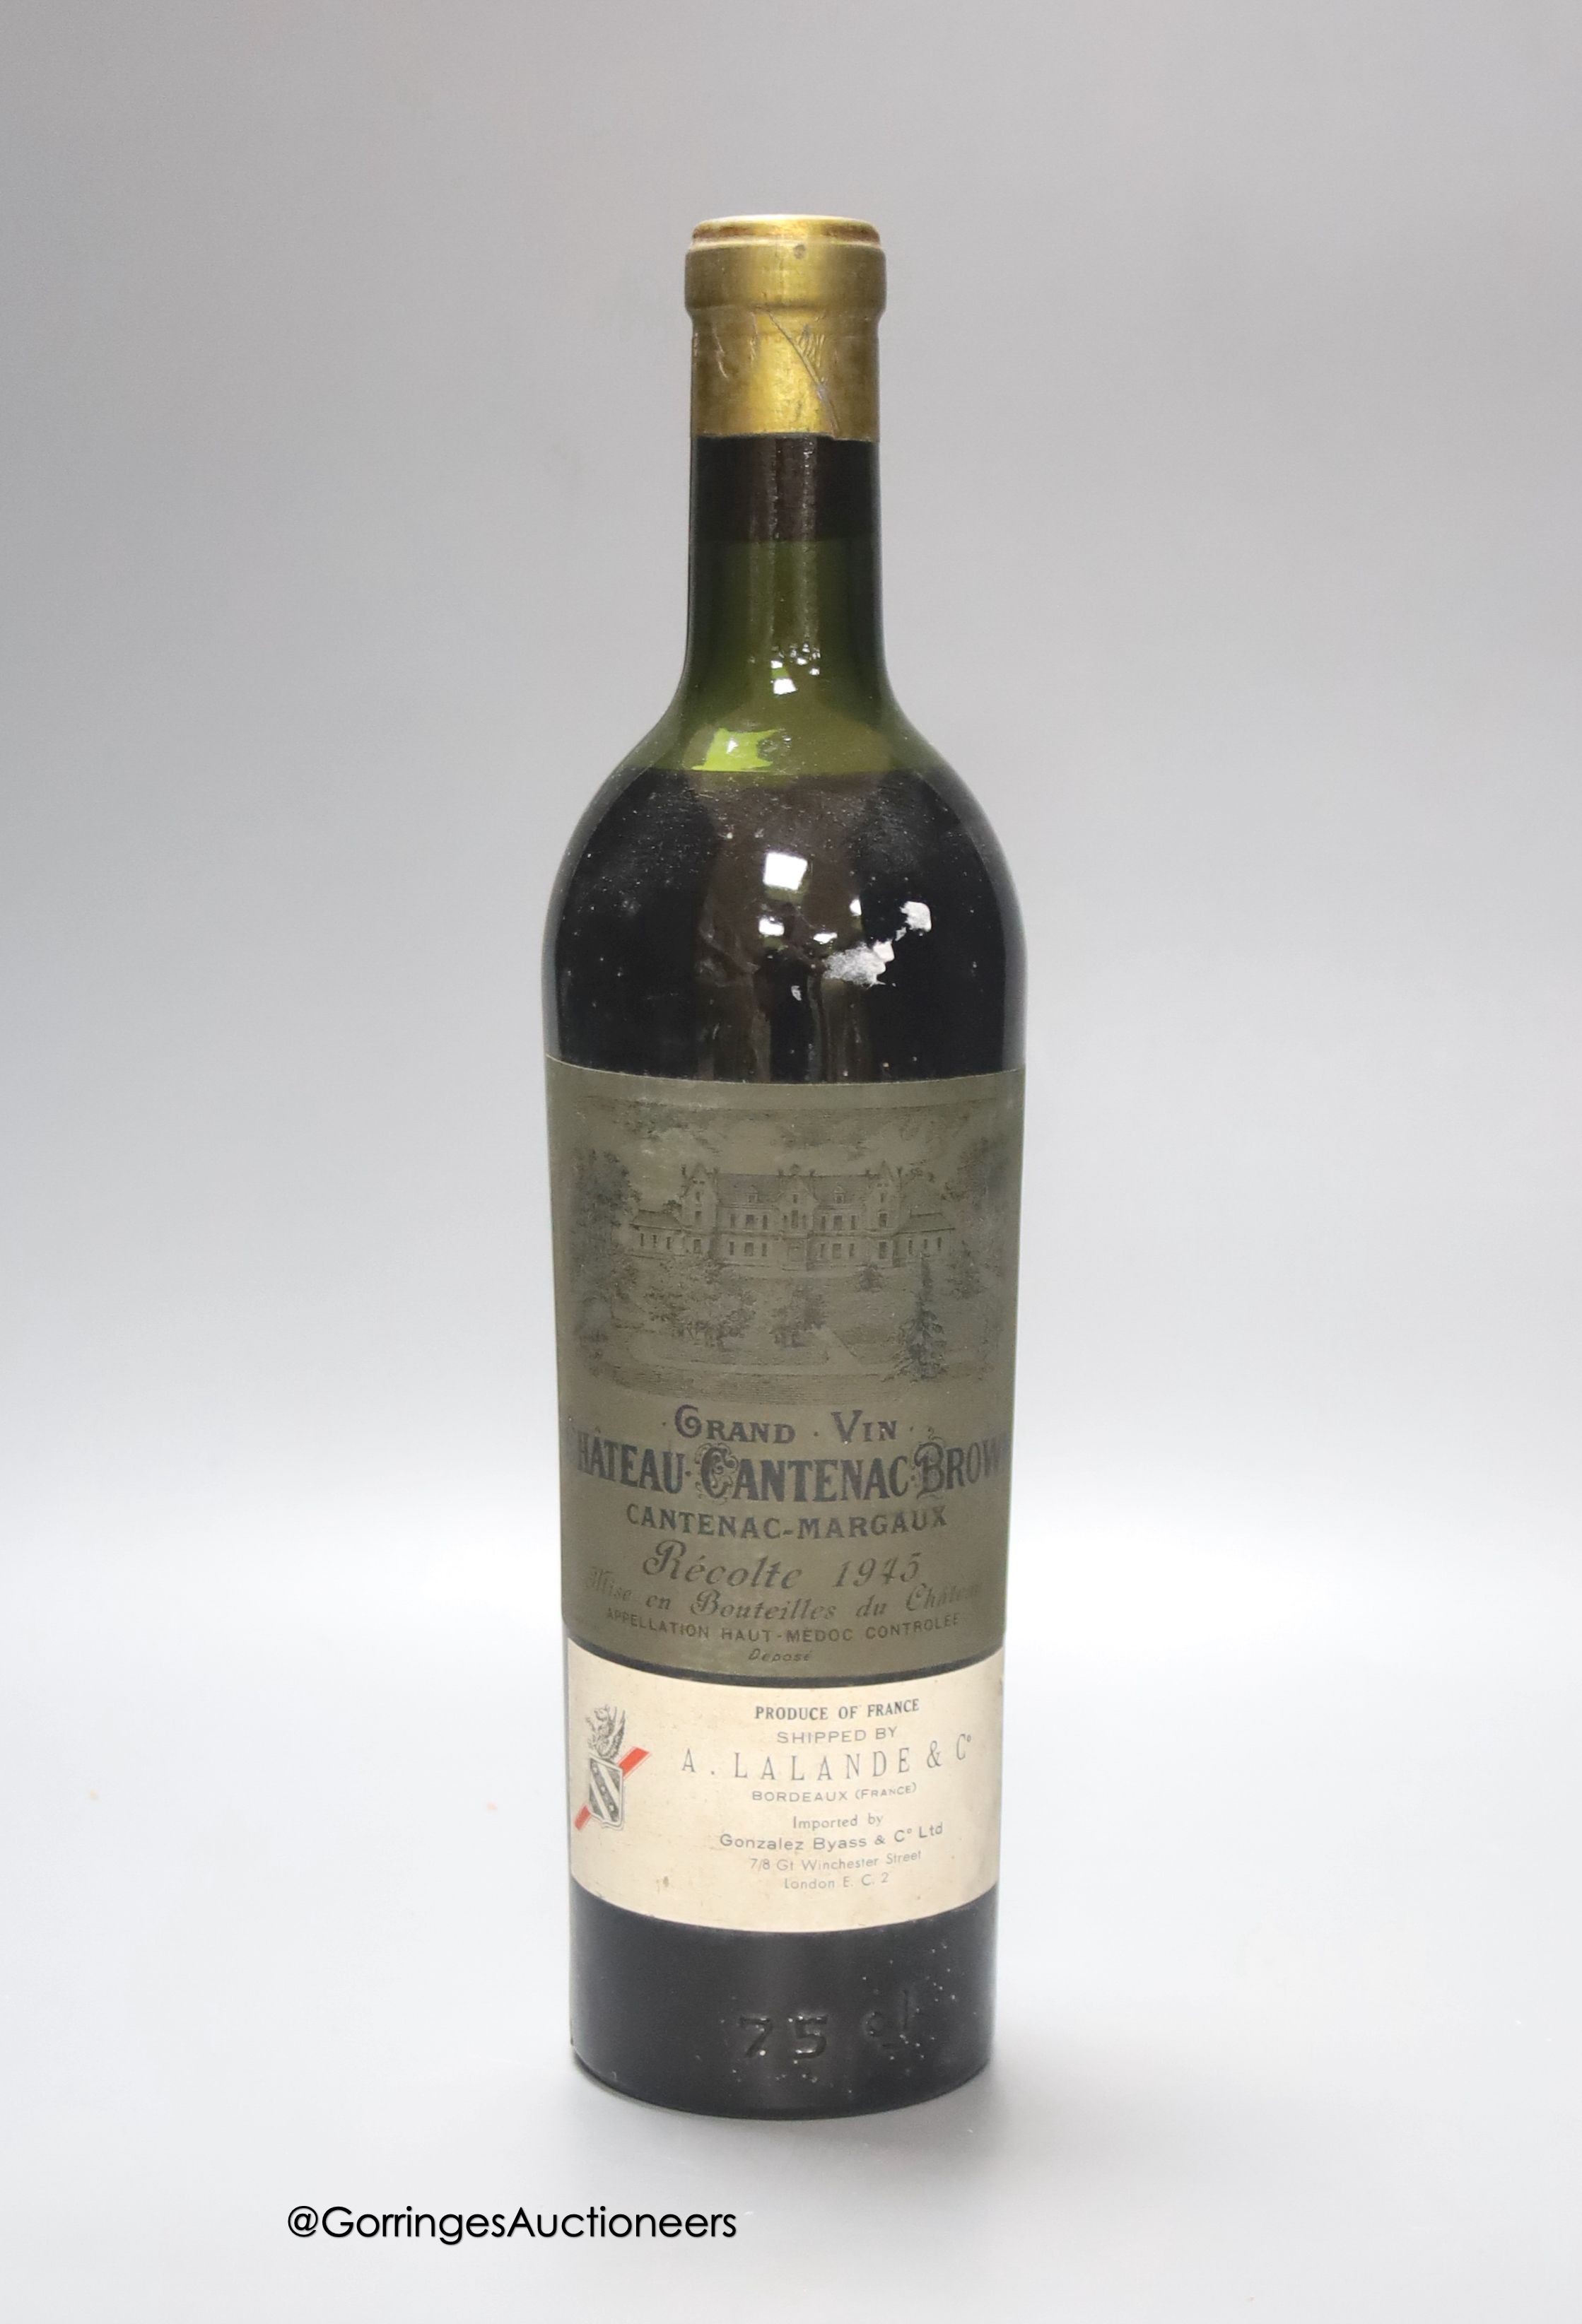 A bottle of Chateau Cantenac-Brown Margaux 1945